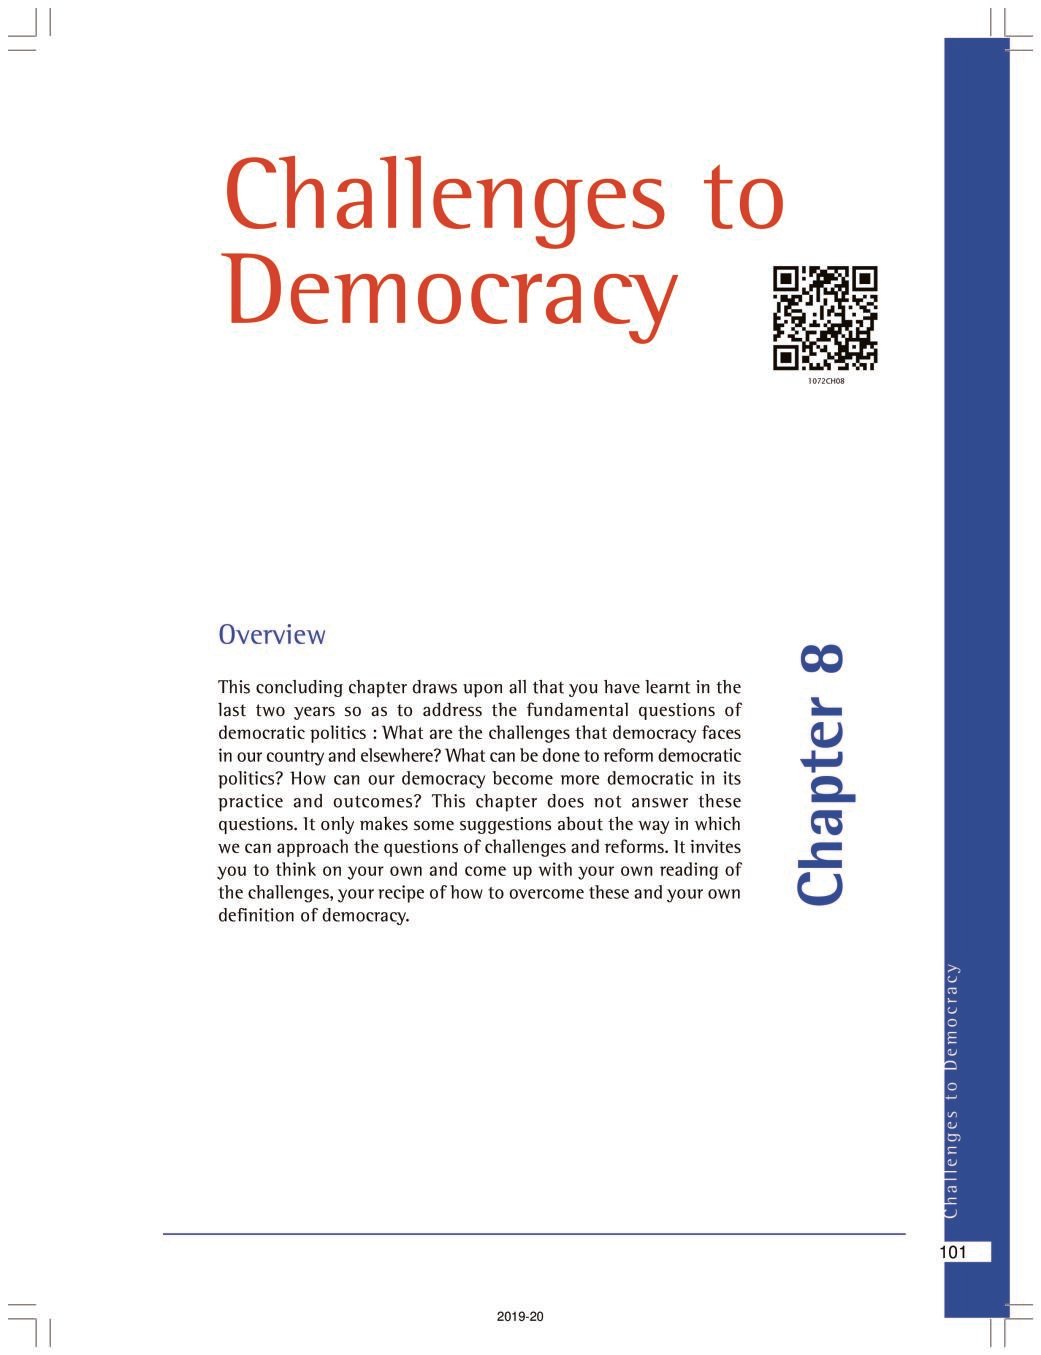 NCERT Book Class 10 Social Science (Civics) Chapter 8 Challenges to Democracy - Page 1